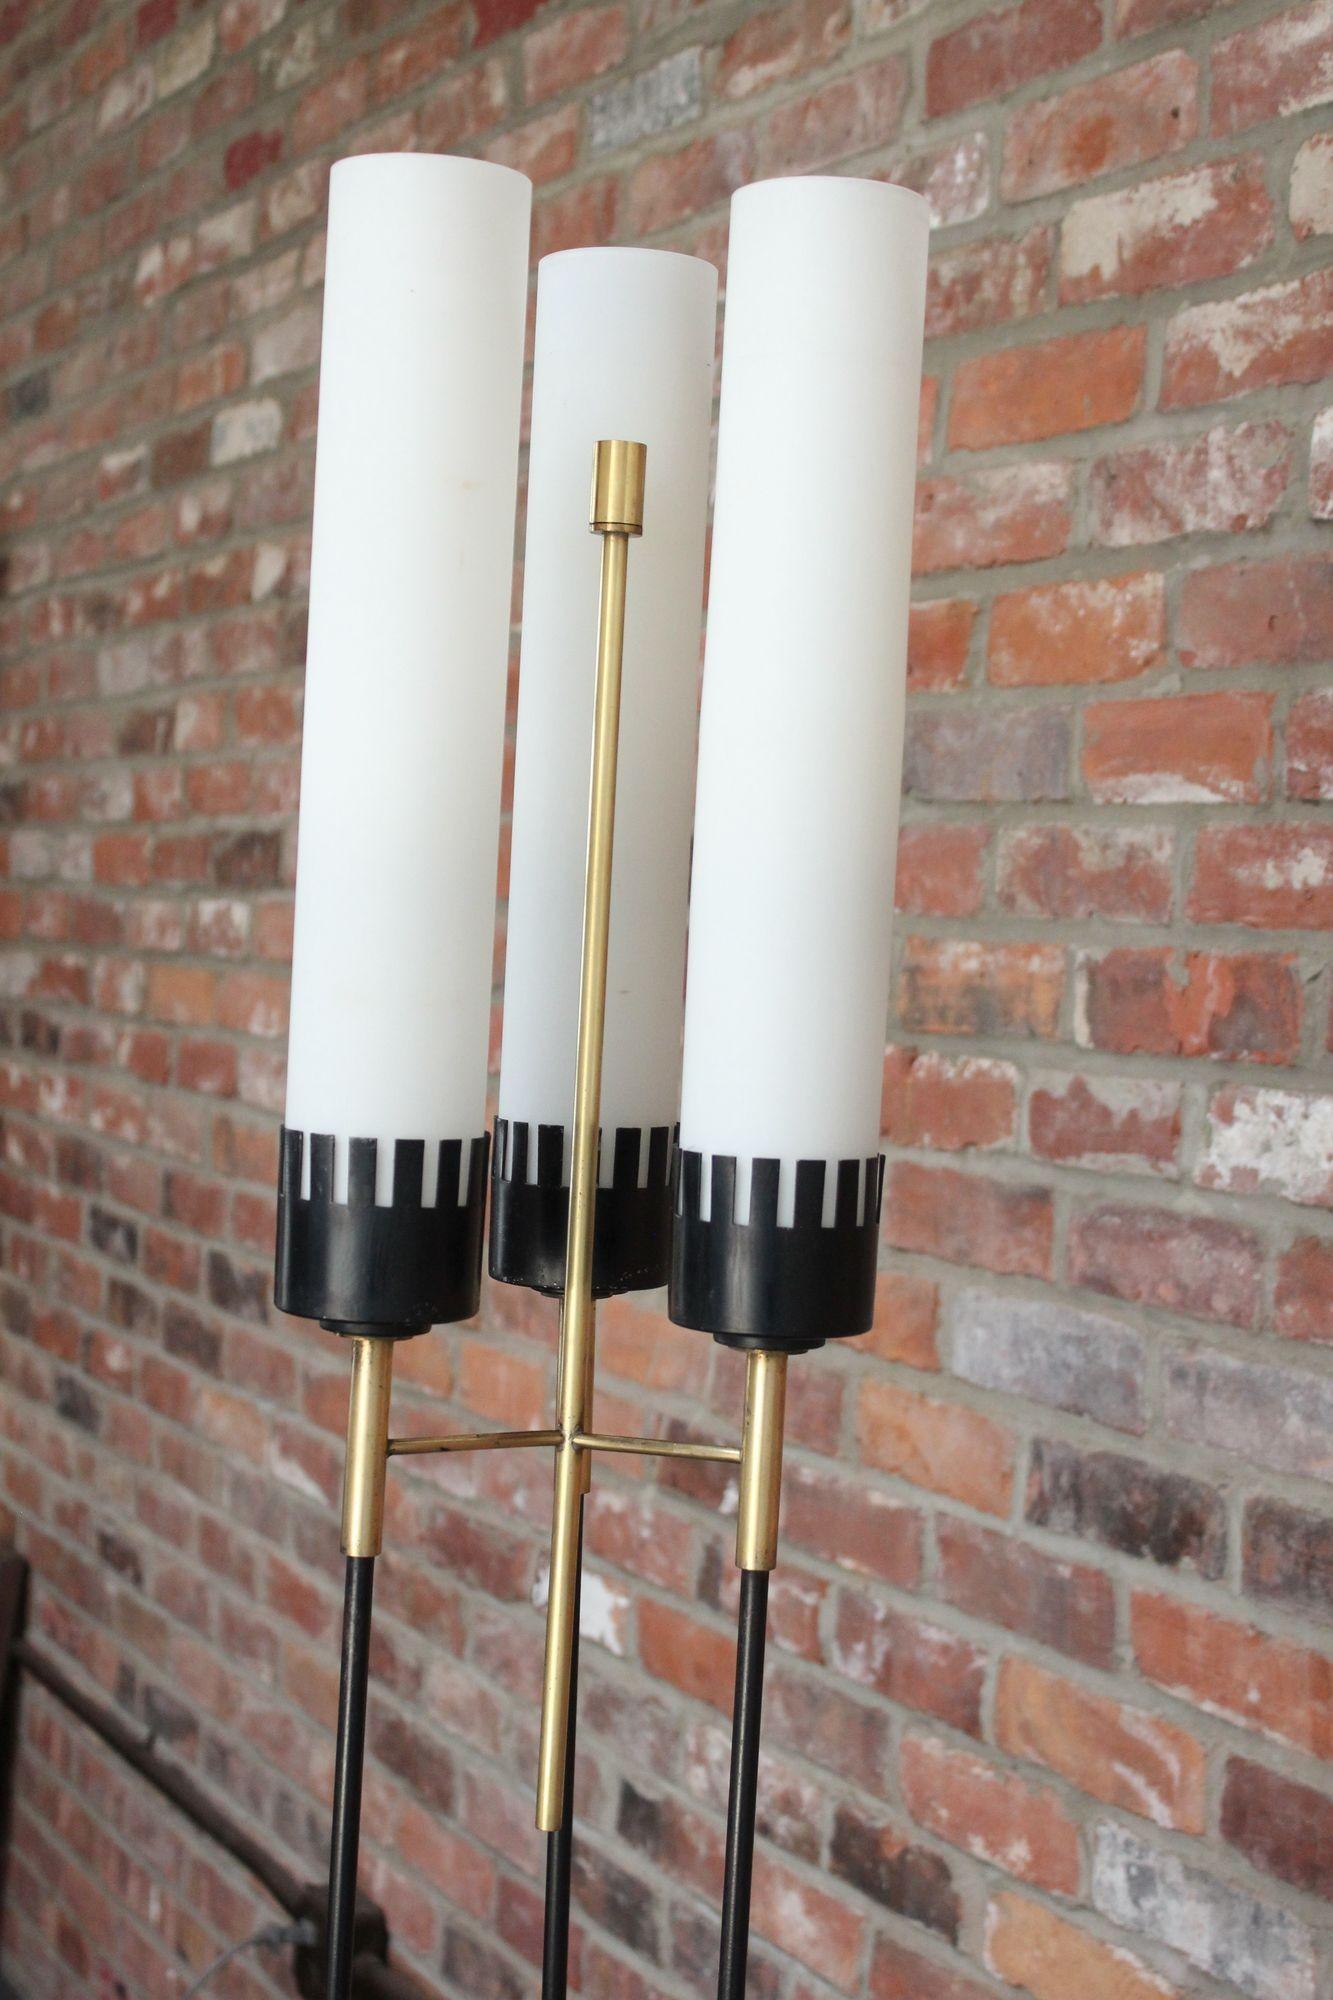 Italian Modernist Three-Fixture Glass, Brass and Metal Floor Lamp by Stilnovo In Good Condition For Sale In Brooklyn, NY